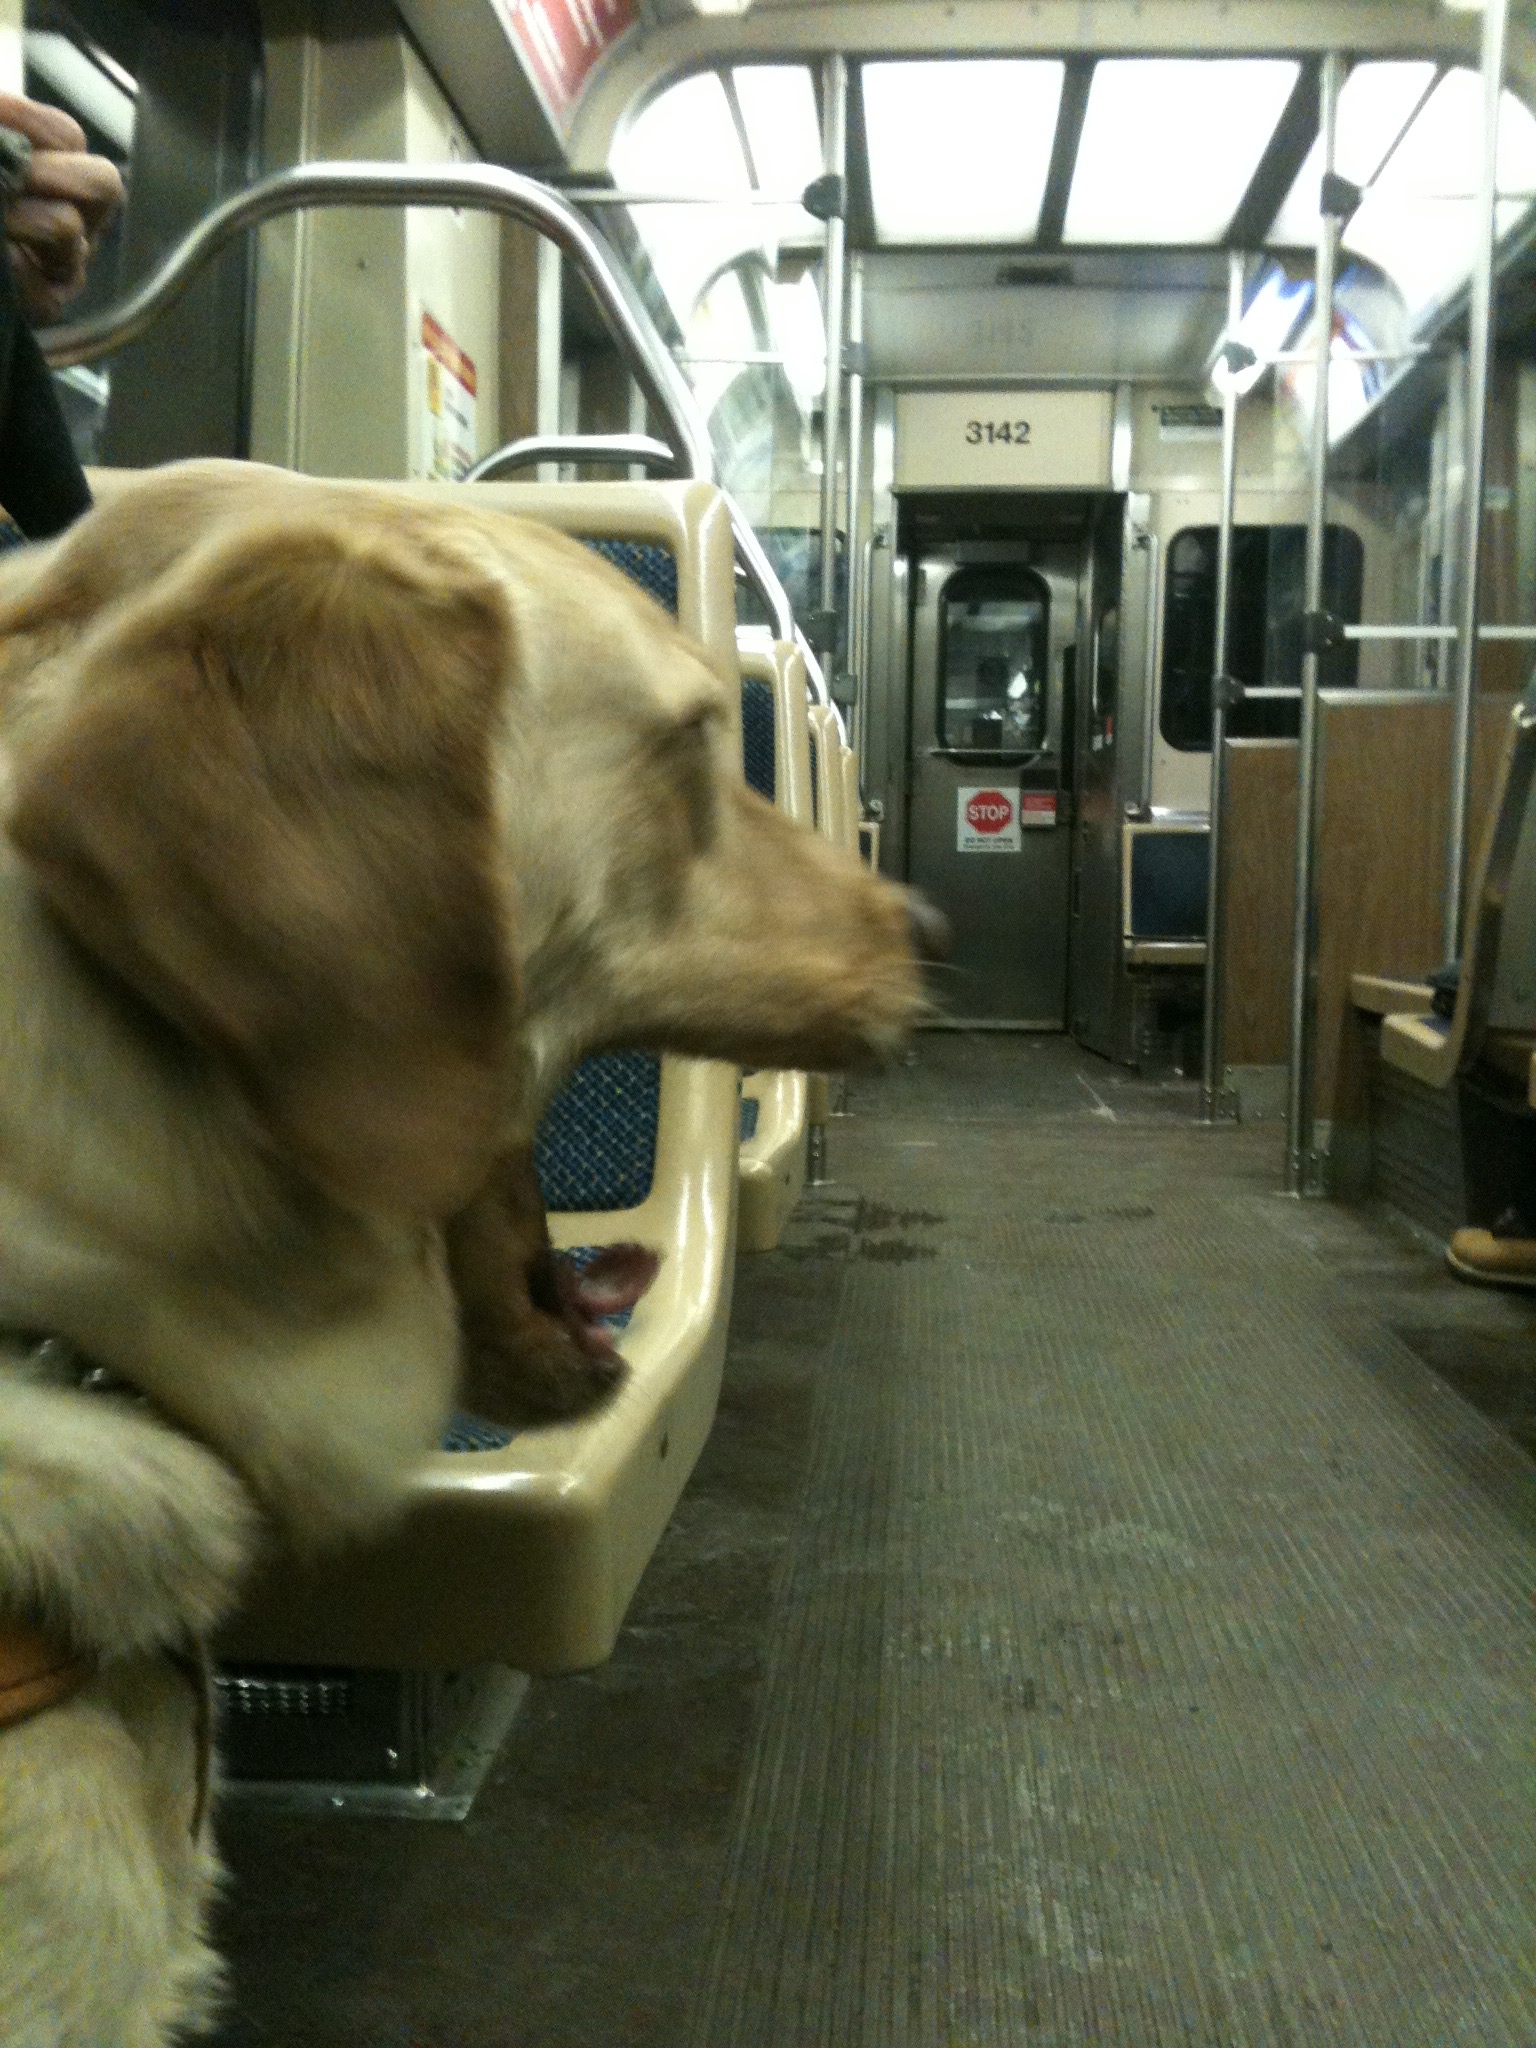 Thanks to the ADA, riding a train is a yawn for Whitney.